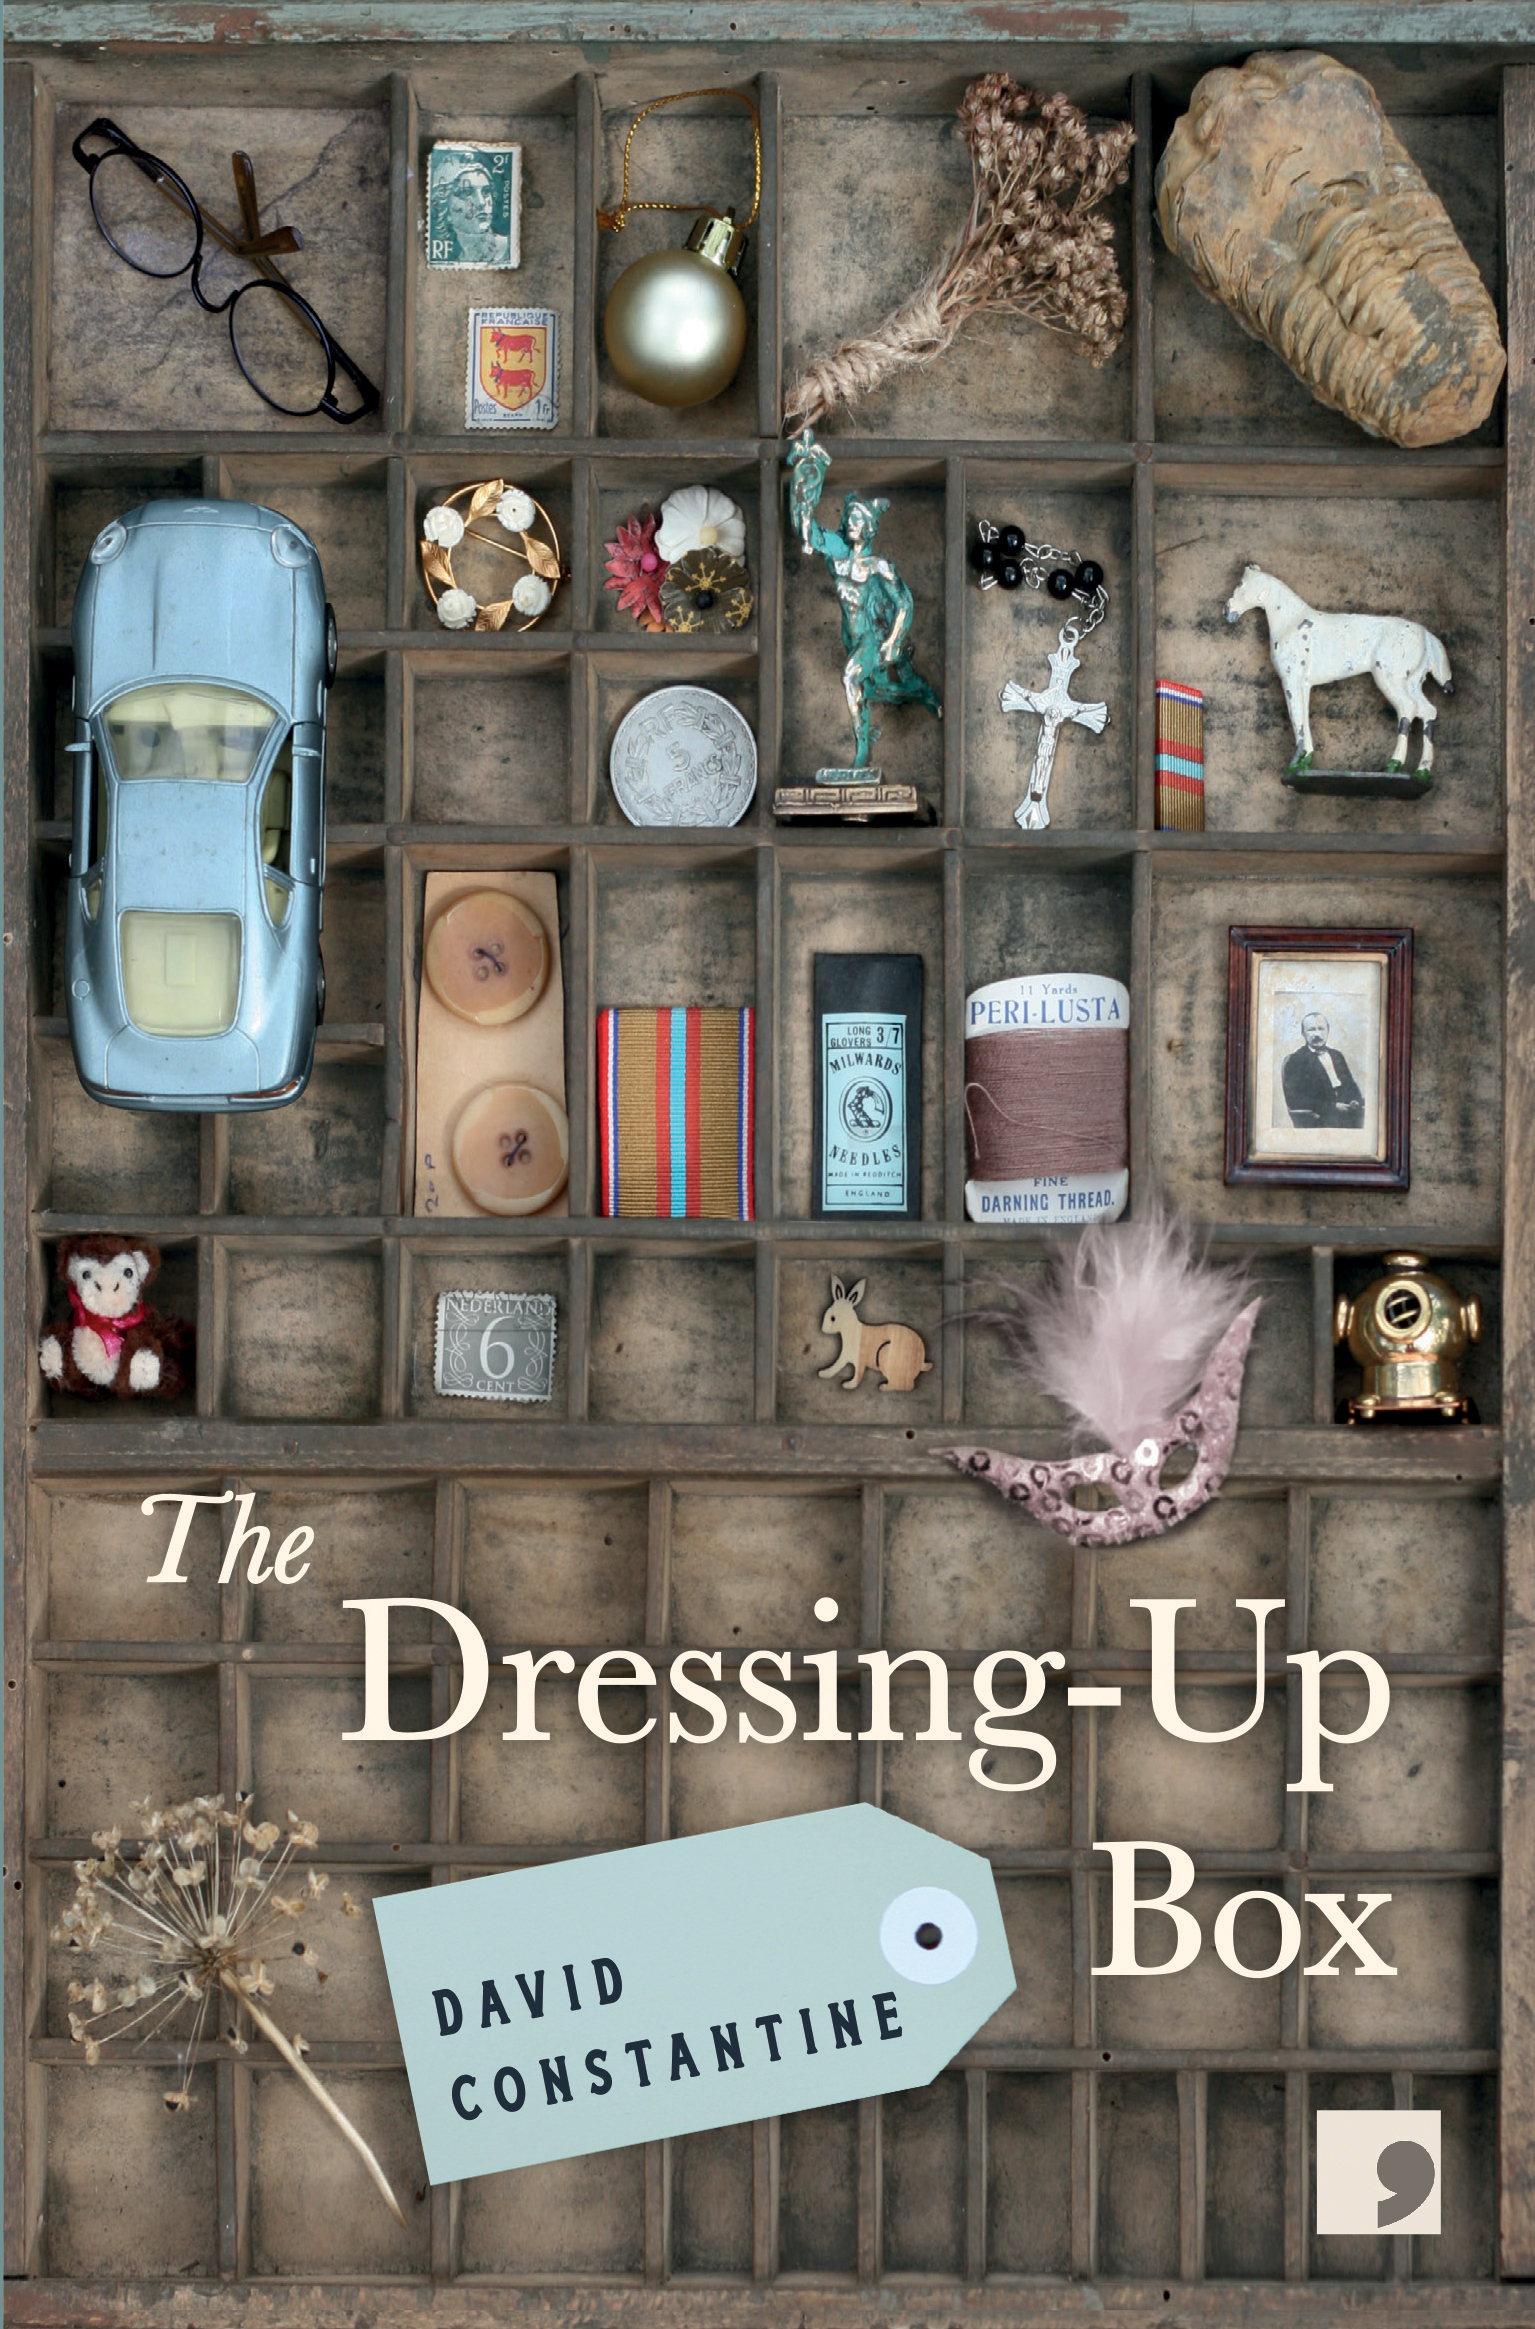 The Dressing-Up Box (Hardback) book cover